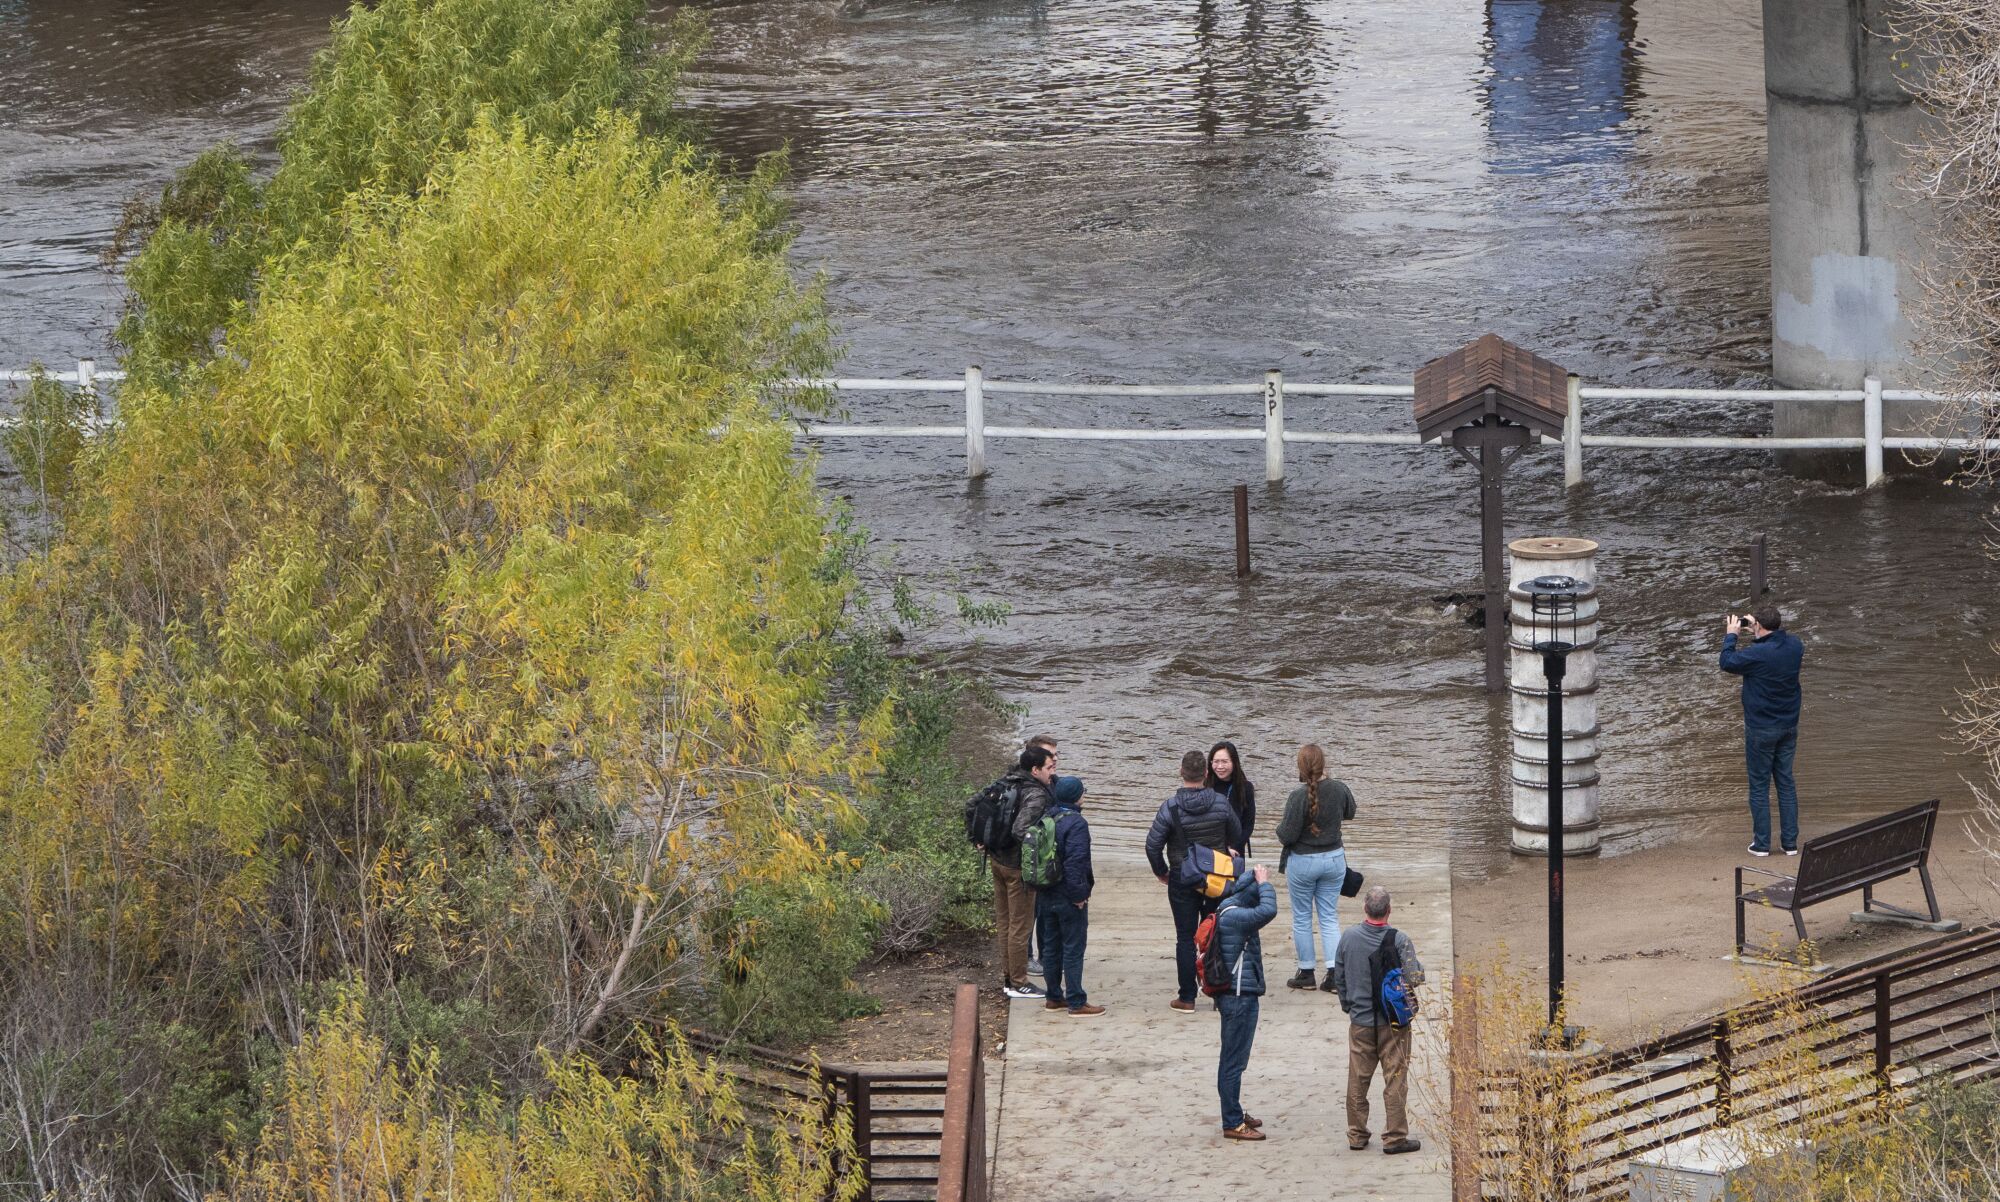 People check out the swollen San Diego River near the Town and Country Resort in Mission Valley.